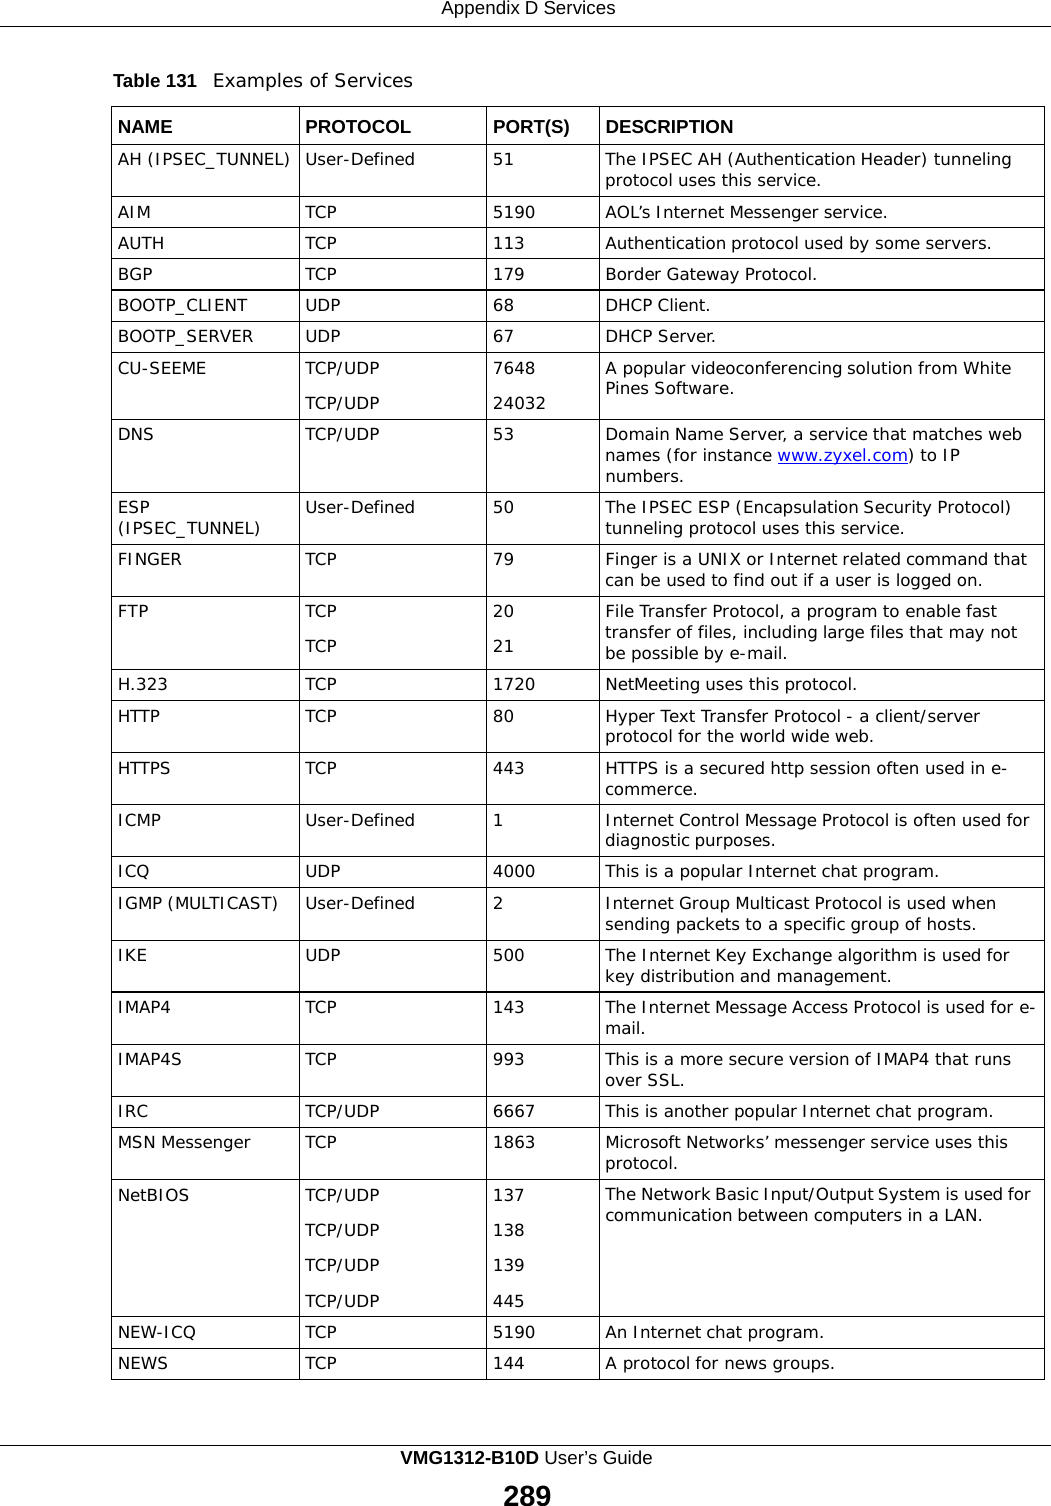 Appendix D Services    Table 131   Examples of Services  NAME PROTOCOL PORT(S) DESCRIPTION AH (IPSEC_TUNNEL) User-Defined 51 The IPSEC AH (Authentication Header) tunneling protocol uses this service. AIM TCP 5190 AOL’s Internet Messenger service. AUTH TCP 113 Authentication protocol used by some servers. BGP TCP 179 Border Gateway Protocol. BOOTP_CLIENT UDP 68 DHCP Client. BOOTP_SERVER UDP 67 DHCP Server. CU-SEEME TCP/UDP  TCP/UDP 7648  24032 A popular videoconferencing solution from White Pines Software. DNS TCP/UDP 53 Domain Name Server, a service that matches web names (for instance www.zyxel.com) to IP numbers. ESP (IPSEC_TUNNEL) User-Defined 50 The IPSEC ESP (Encapsulation Security Protocol) tunneling protocol uses this service. FINGER TCP 79 Finger is a UNIX or Internet related command that can be used to find out if a user is logged on. FTP TCP  TCP 20  21 File Transfer Protocol, a program to enable fast transfer of files, including large files that may not be possible by e-mail. H.323 TCP 1720 NetMeeting uses this protocol. HTTP TCP 80 Hyper Text Transfer Protocol - a client/server protocol for the world wide web. HTTPS TCP 443 HTTPS is a secured http session often used in e- commerce. ICMP User-Defined 1 Internet Control Message Protocol is often used for diagnostic purposes. ICQ UDP 4000 This is a popular Internet chat program. IGMP (MULTICAST) User-Defined 2 Internet Group Multicast Protocol is used when sending packets to a specific group of hosts. IKE UDP 500 The Internet Key Exchange algorithm is used for key distribution and management. IMAP4 TCP 143 The Internet Message Access Protocol is used for e- mail. IMAP4S TCP 993 This is a more secure version of IMAP4 that runs over SSL. IRC TCP/UDP 6667 This is another popular Internet chat program. MSN Messenger TCP 1863 Microsoft Networks’ messenger service uses this protocol. NetBIOS TCP/UDP TCP/UDP TCP/UDP TCP/UDP 137  138  139  445 The Network Basic Input/Output System is used for communication between computers in a LAN. NEW-ICQ TCP 5190 An Internet chat program. NEWS TCP 144 A protocol for news groups. VMG1312-B10D User’s Guide 289  